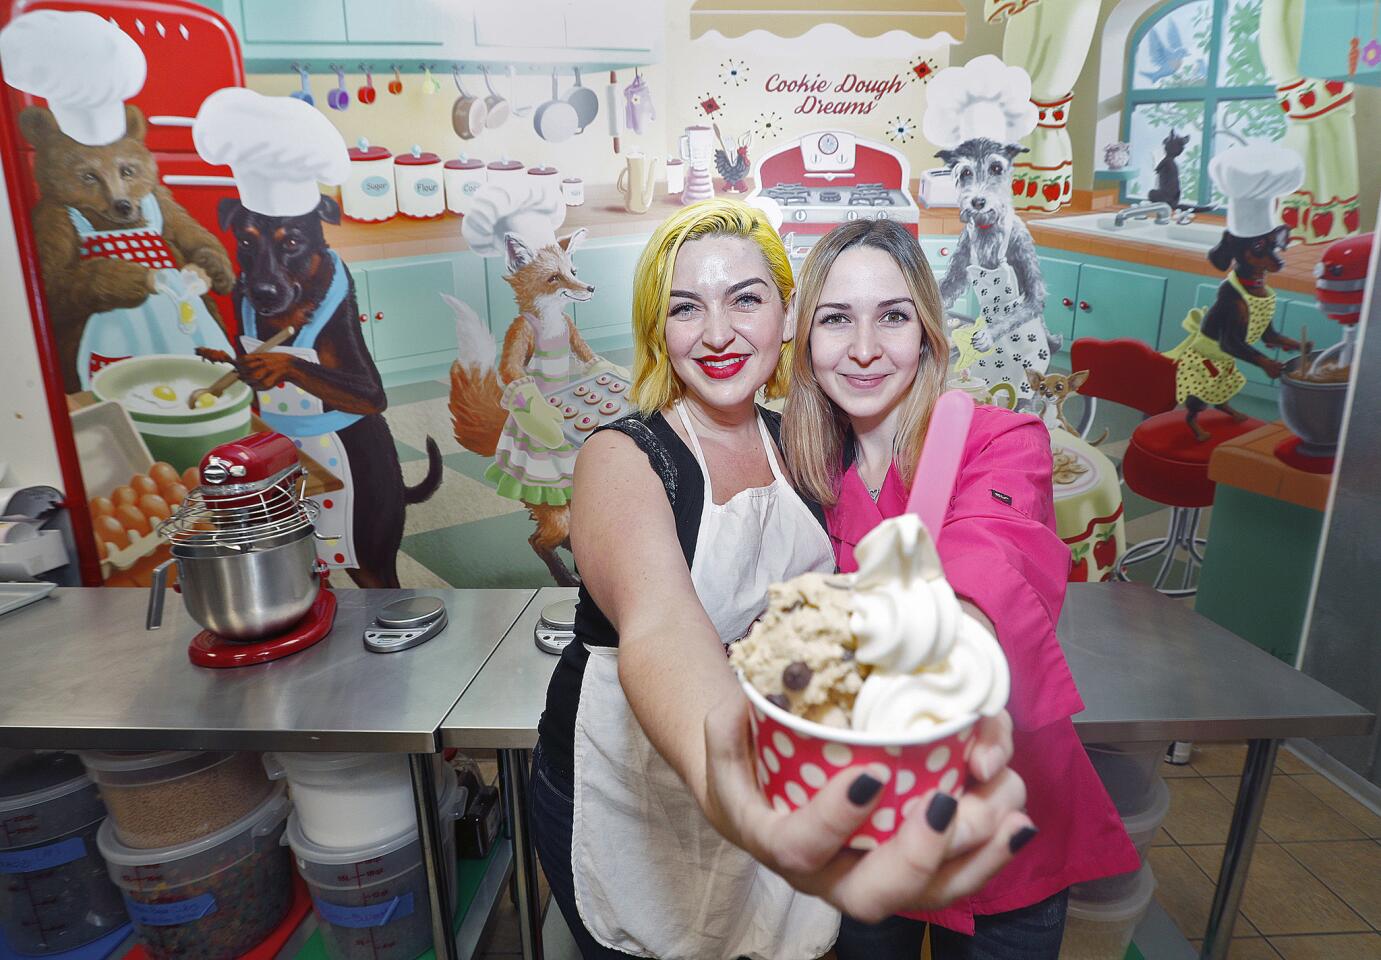 Sisters Danielle and Cara Friedman hold a cookie dough and ice cream cup in their kitchen at Cookie Dough Dreams, a one-month old and first of it's kind in Los Angeles County cookie dough parlor, in Burbank on Friday, July 13, 2018. Cookie dough that is good for everyone, with flavors like traditional chocolate chip and brownie batter, includes sugar-free, gluten-free, and vegan doughs that the Friedman sisters are quite proud of.